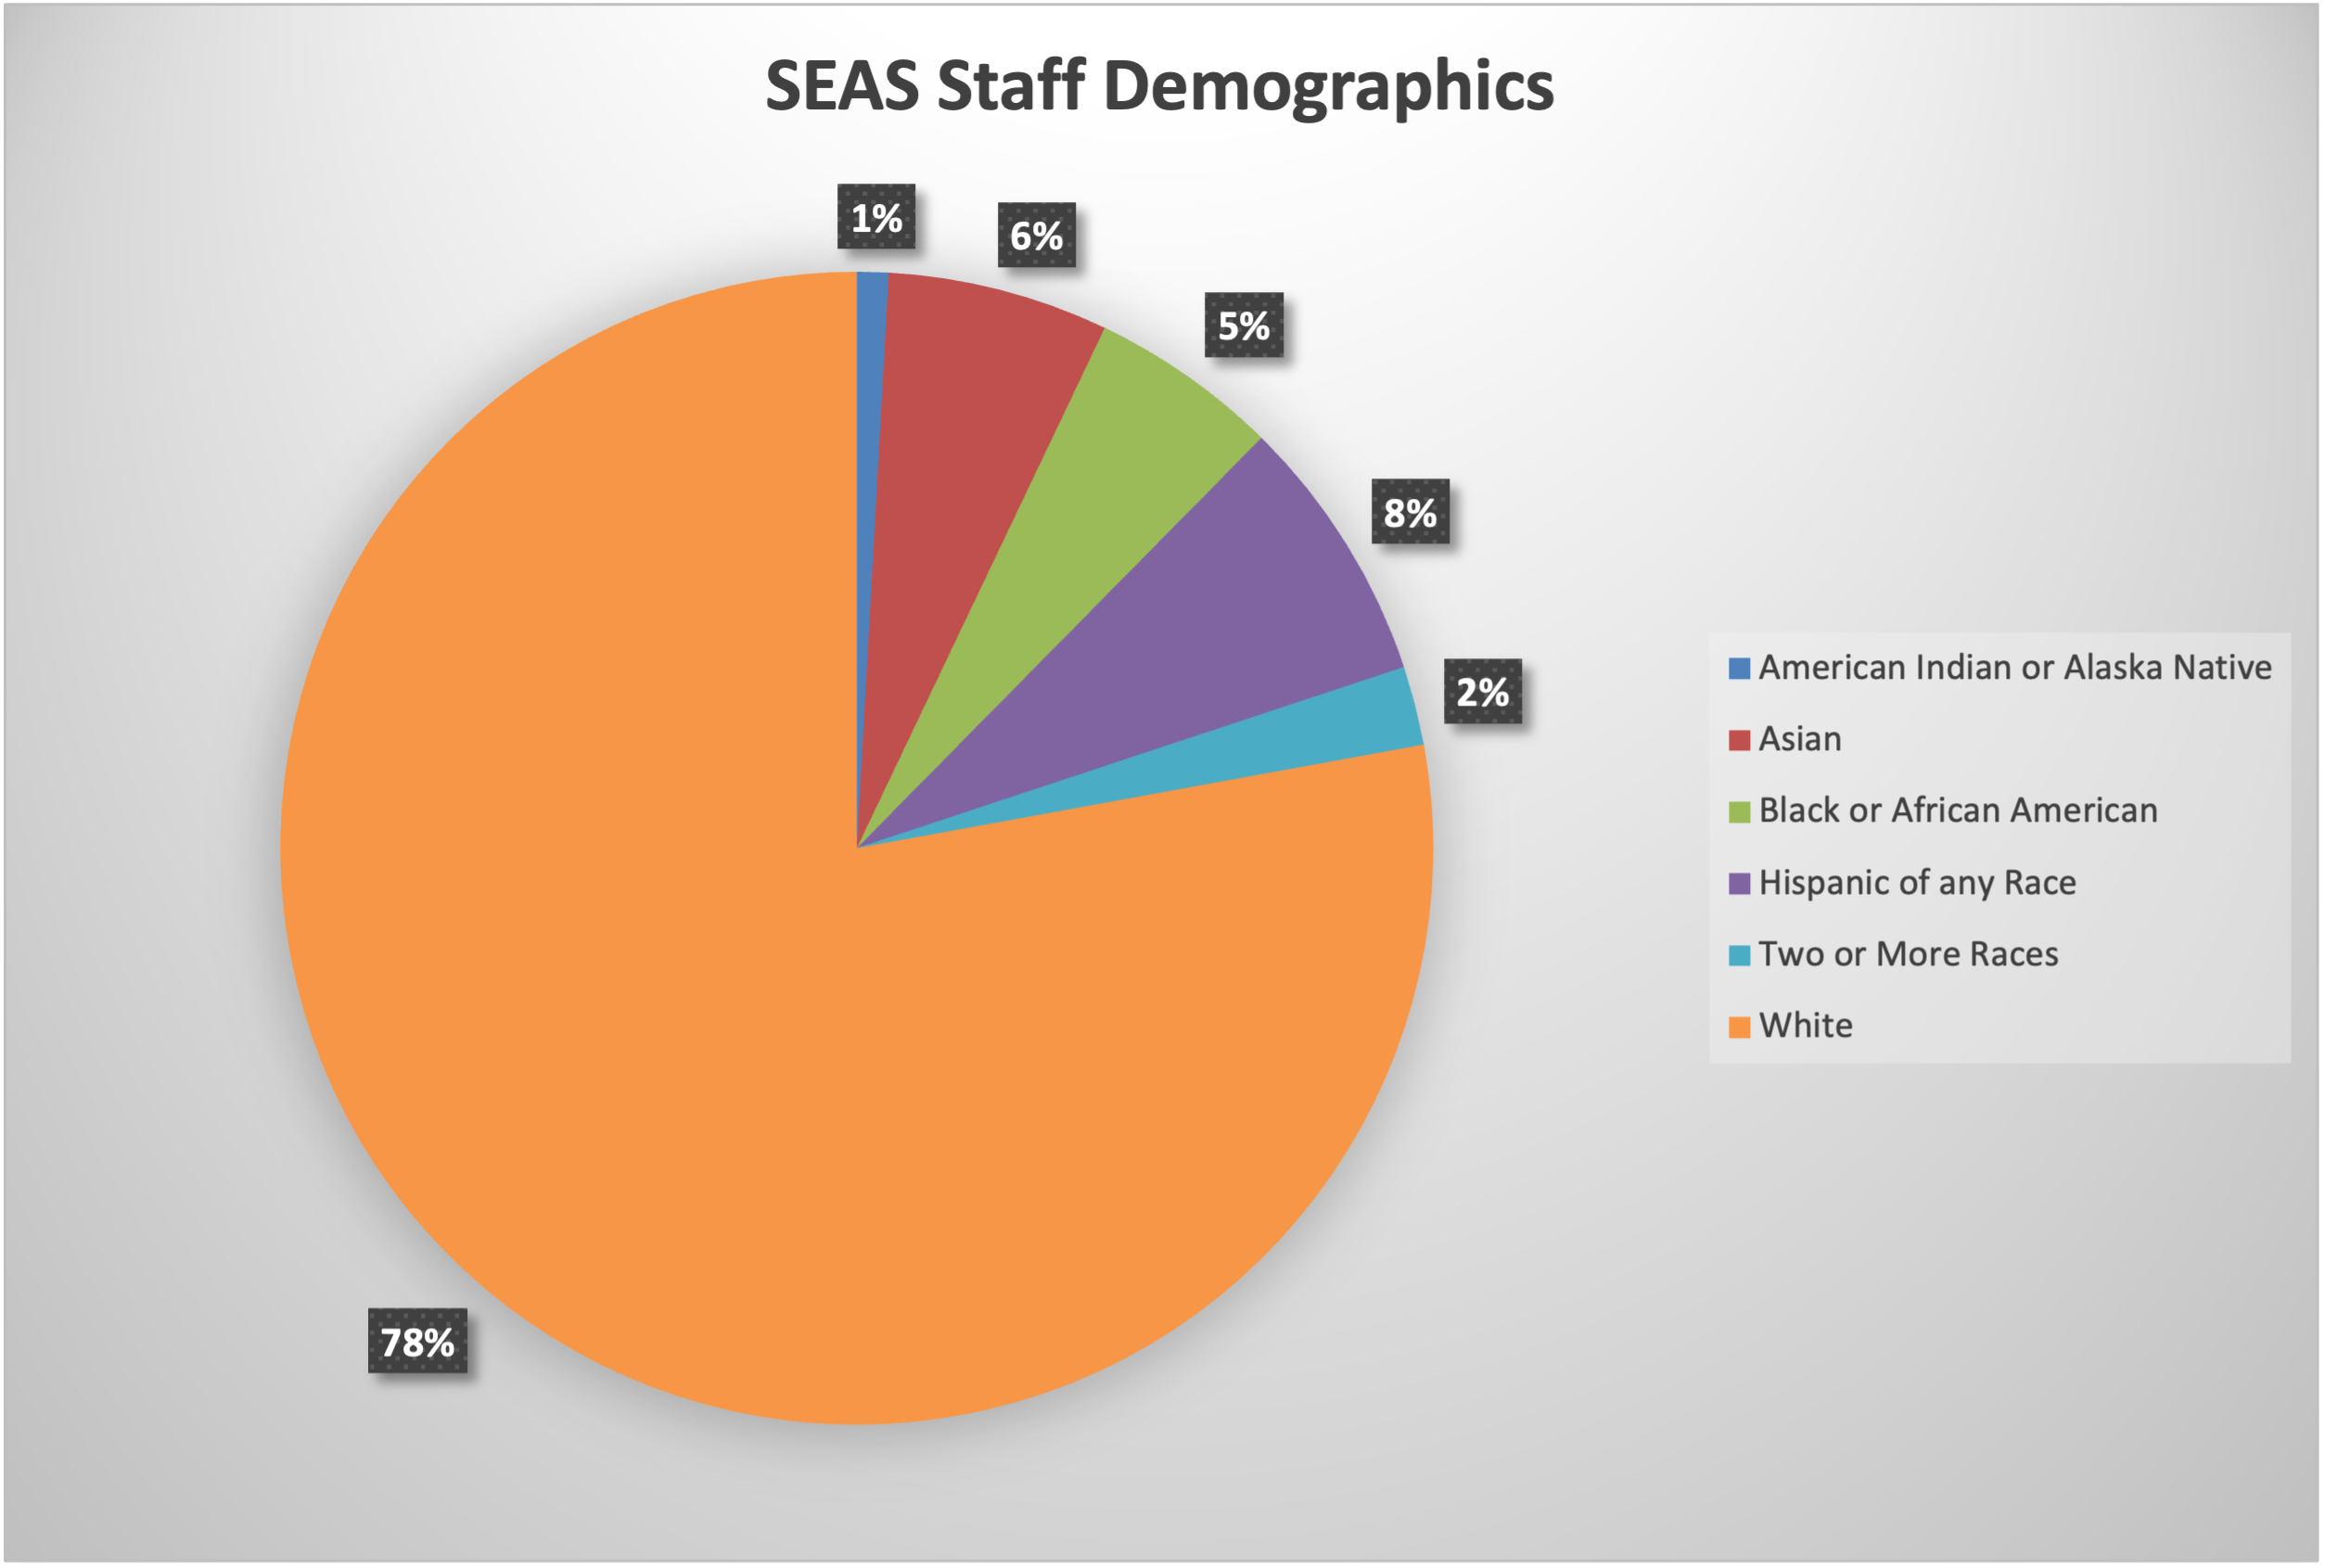 Pie Chart displaying SEAS Staff Demographics. 78% of staff identify as White, all other sections are under 10%.